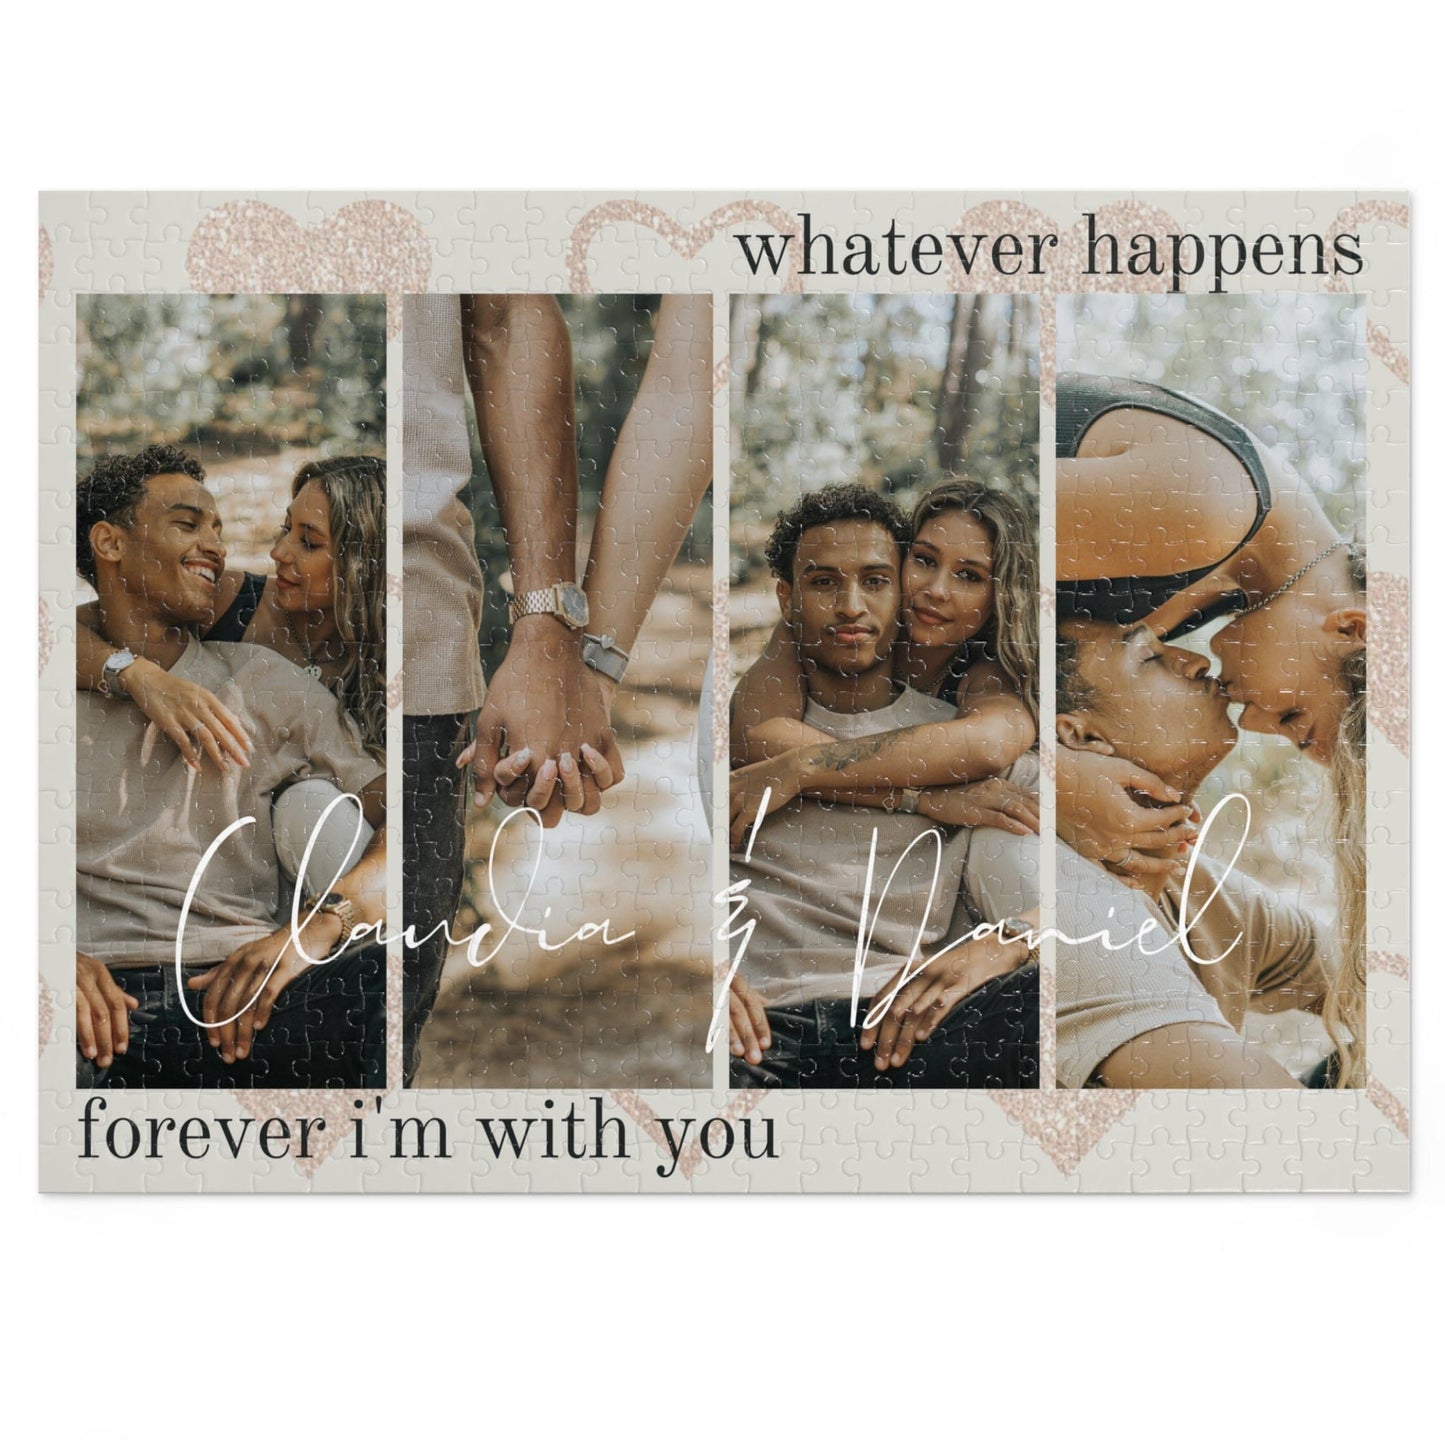 Personalized Jigsaw Puzzles for Adults from Photo - 1000/500/252/110 Pieces - Romantic DIY Valentine's Gifts for Boyfriend